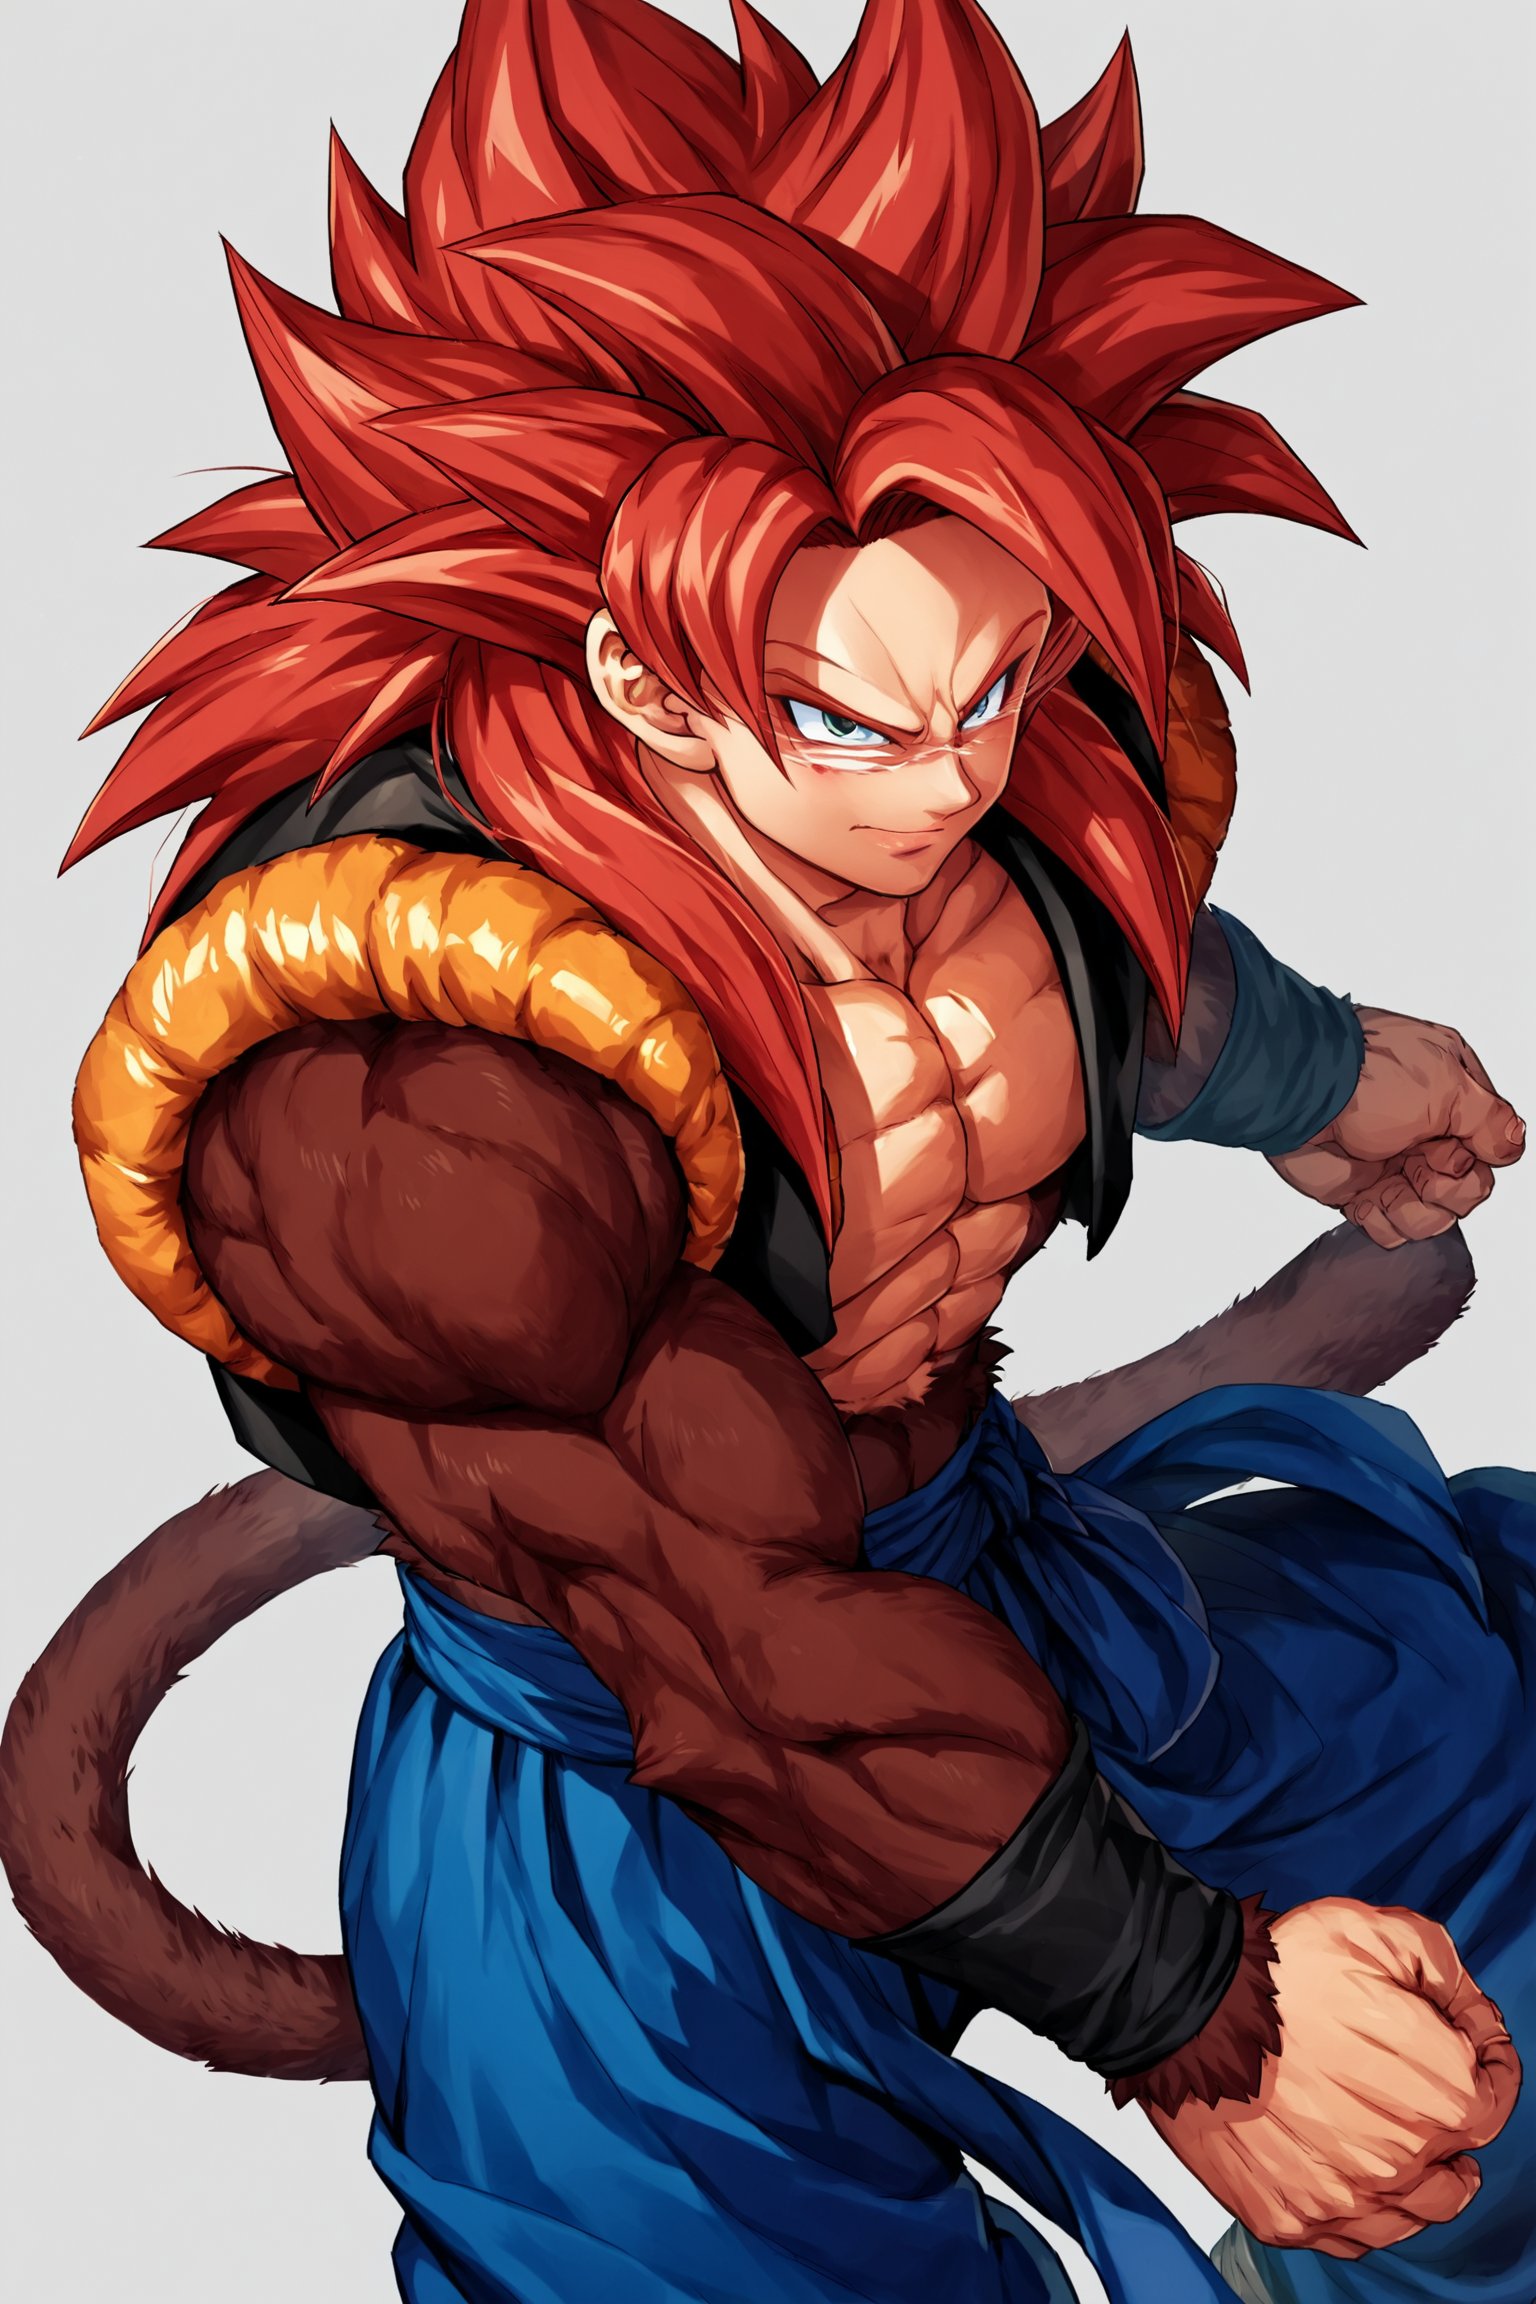 score_9, score_8_up, score_7_up, score_6_up, score_5_up, score_4_up, gogeta_ssj4, super saiyan, red hair, blue eyes, body fur, spiked hair, monkey tail, solo, muscular male, source_anime,  rating_questionable, 


